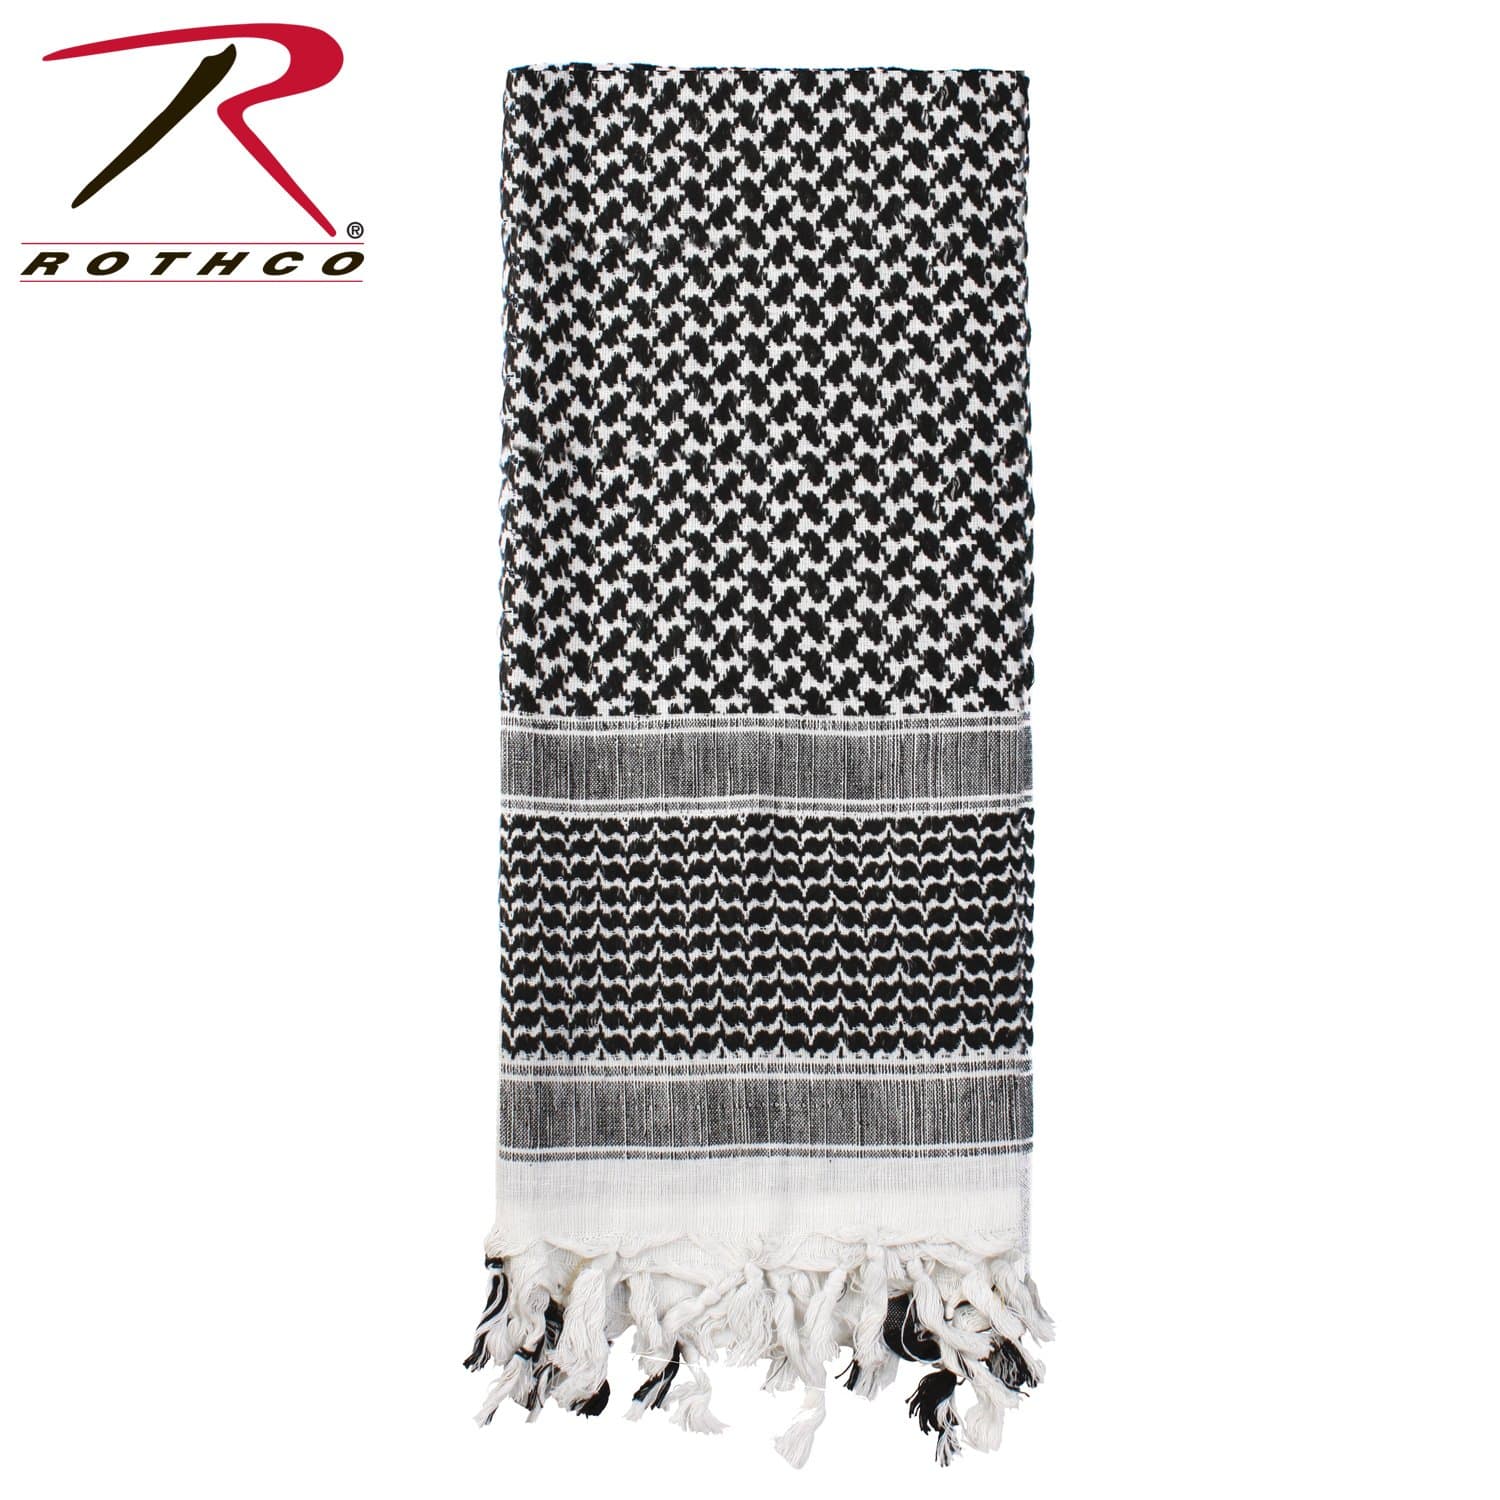 Rothco Shemagh Tactical Desert Keffiyeh Scarf - Black/White - Eminent Paintball And Airsoft